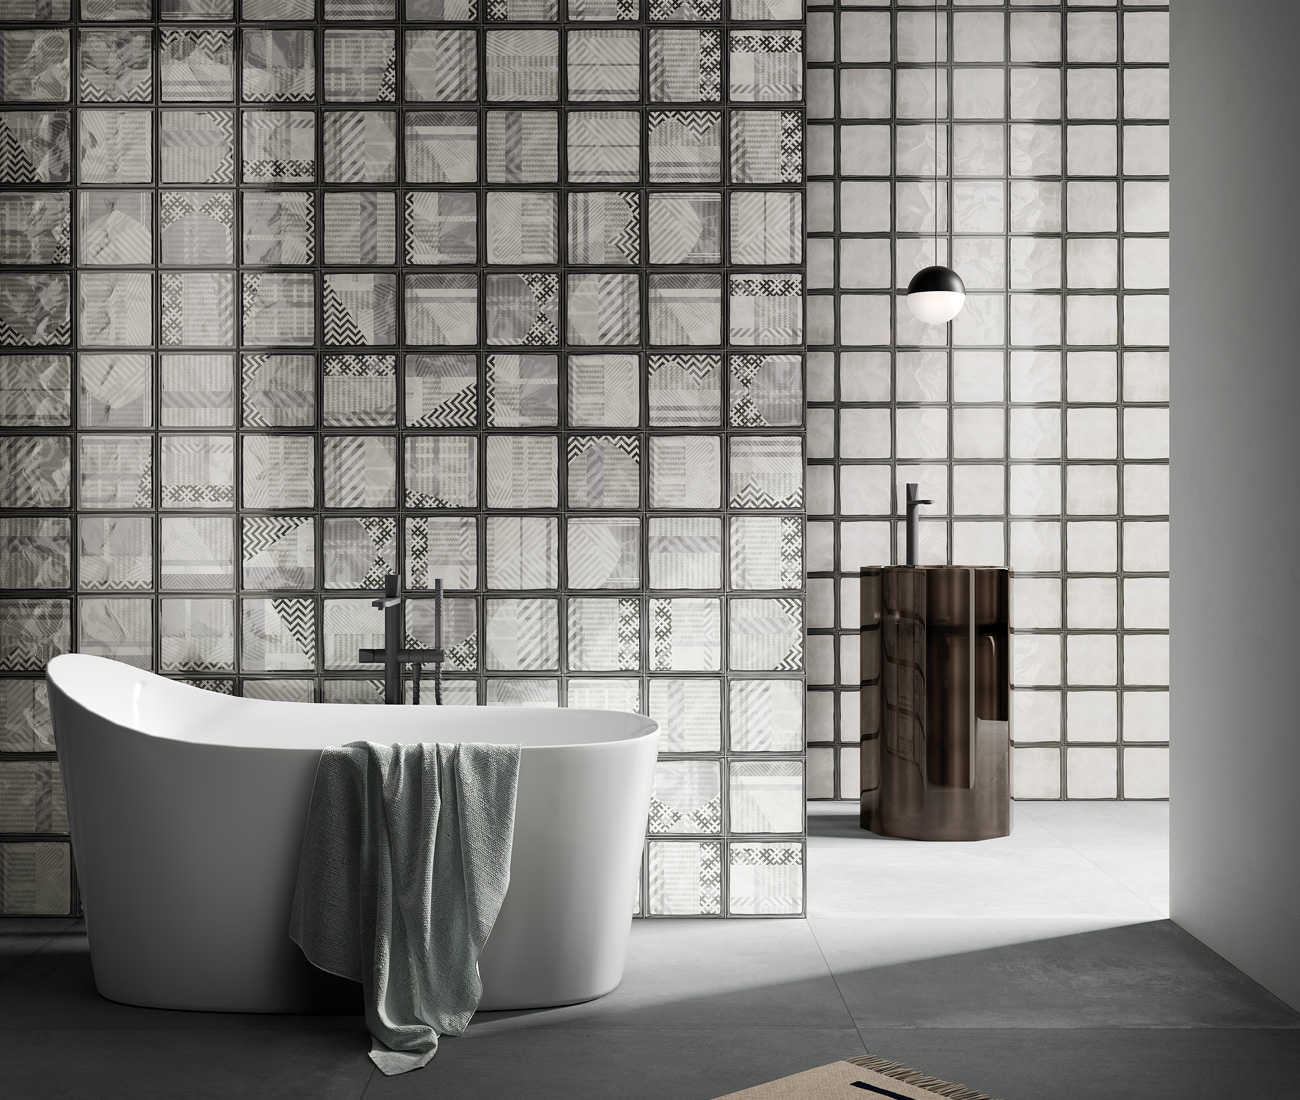 Bathroom interior with tiles from Ciot in Toronto